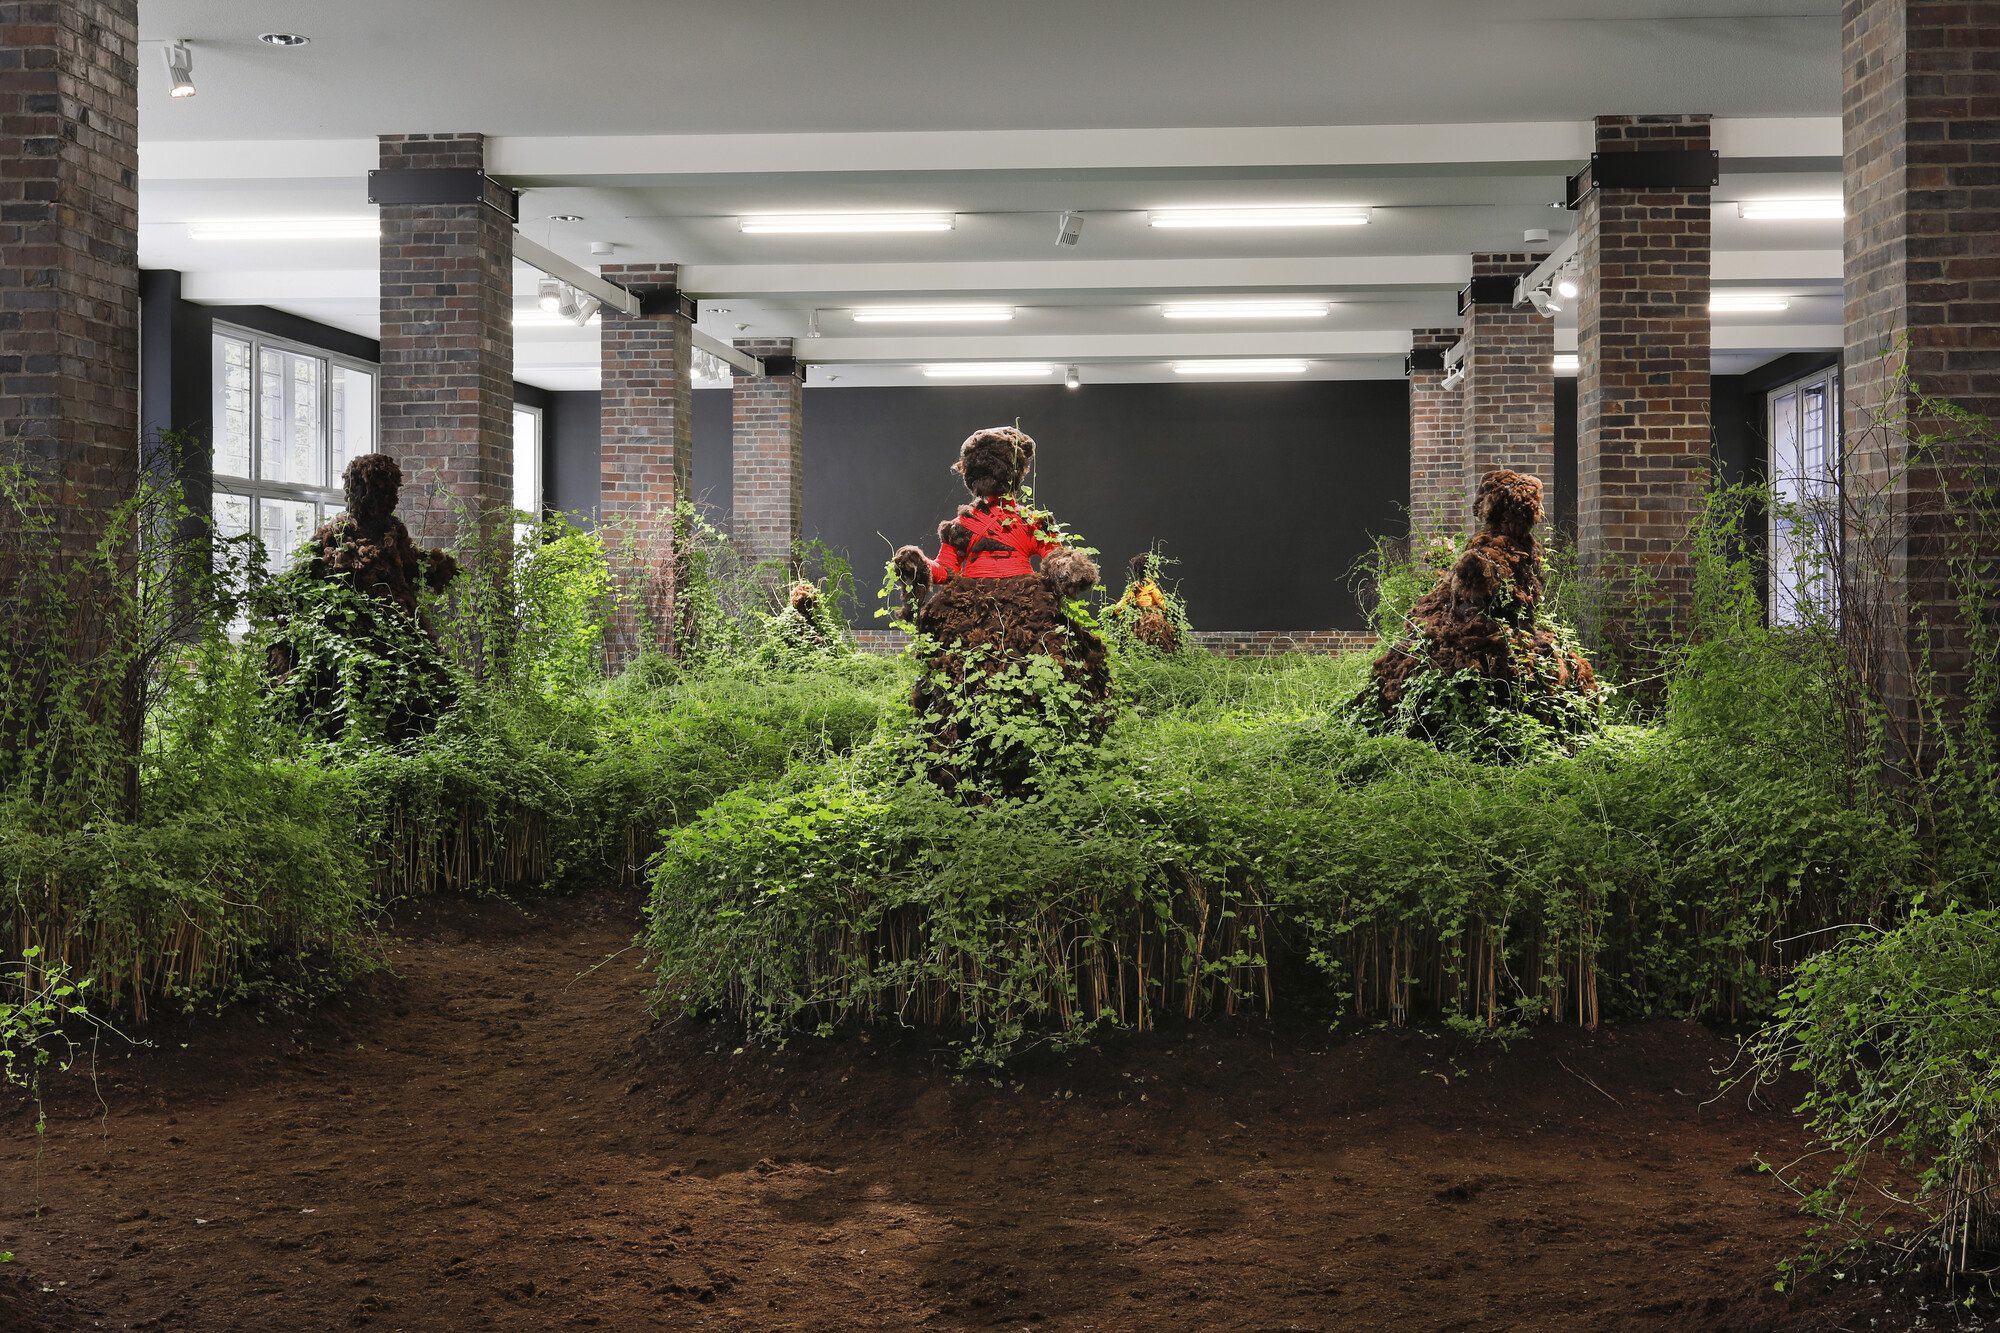 View of Precious Okoyomon, Earthseed at the Museum Für Moderne Kunst, Frankfurt, 2020. Courtesy of the artist, the Museum Für Moderne Kunst, and Quinn Harrelson / Current Projects. Photo: Axel Schneider.